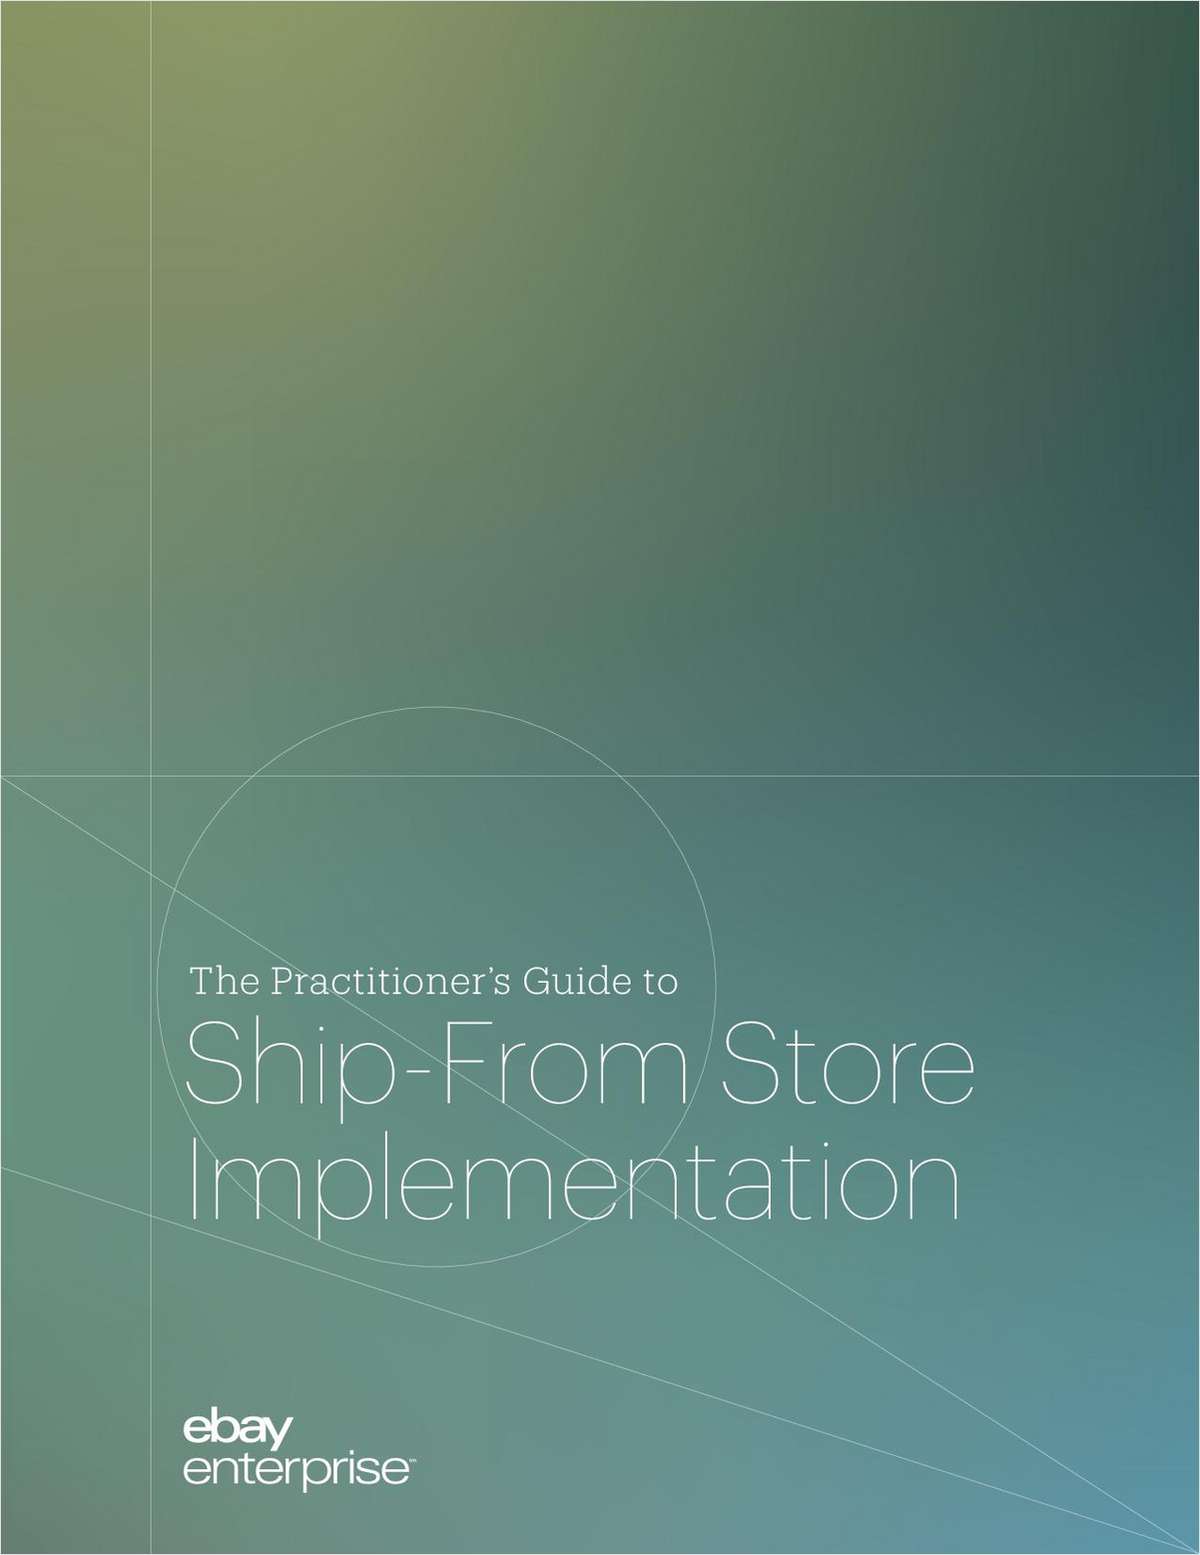 The Practitioner's Guide to Ship-From Store Implementation